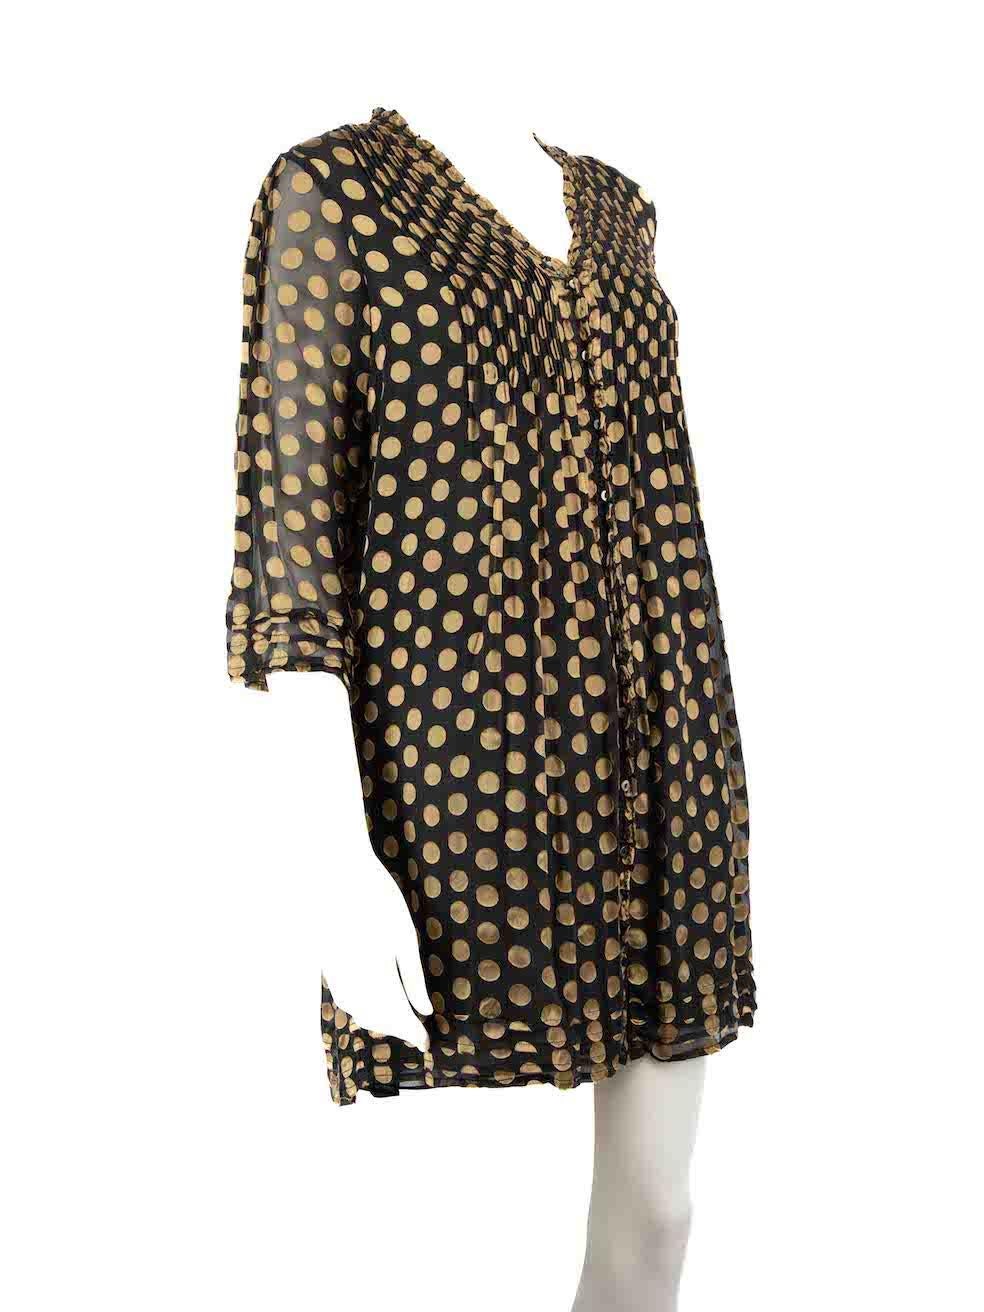 CONDITION is Very good. Hardly any visible wear to dress is evident on this used Diane Von Furstenberg designer resale item.
 
 
 
 Details
 
 
 Black
 
 Synthetic
 
 Mini dress
 
 Gold polkadot pattern
 
 V neckline
 
 Front button up closure
 
